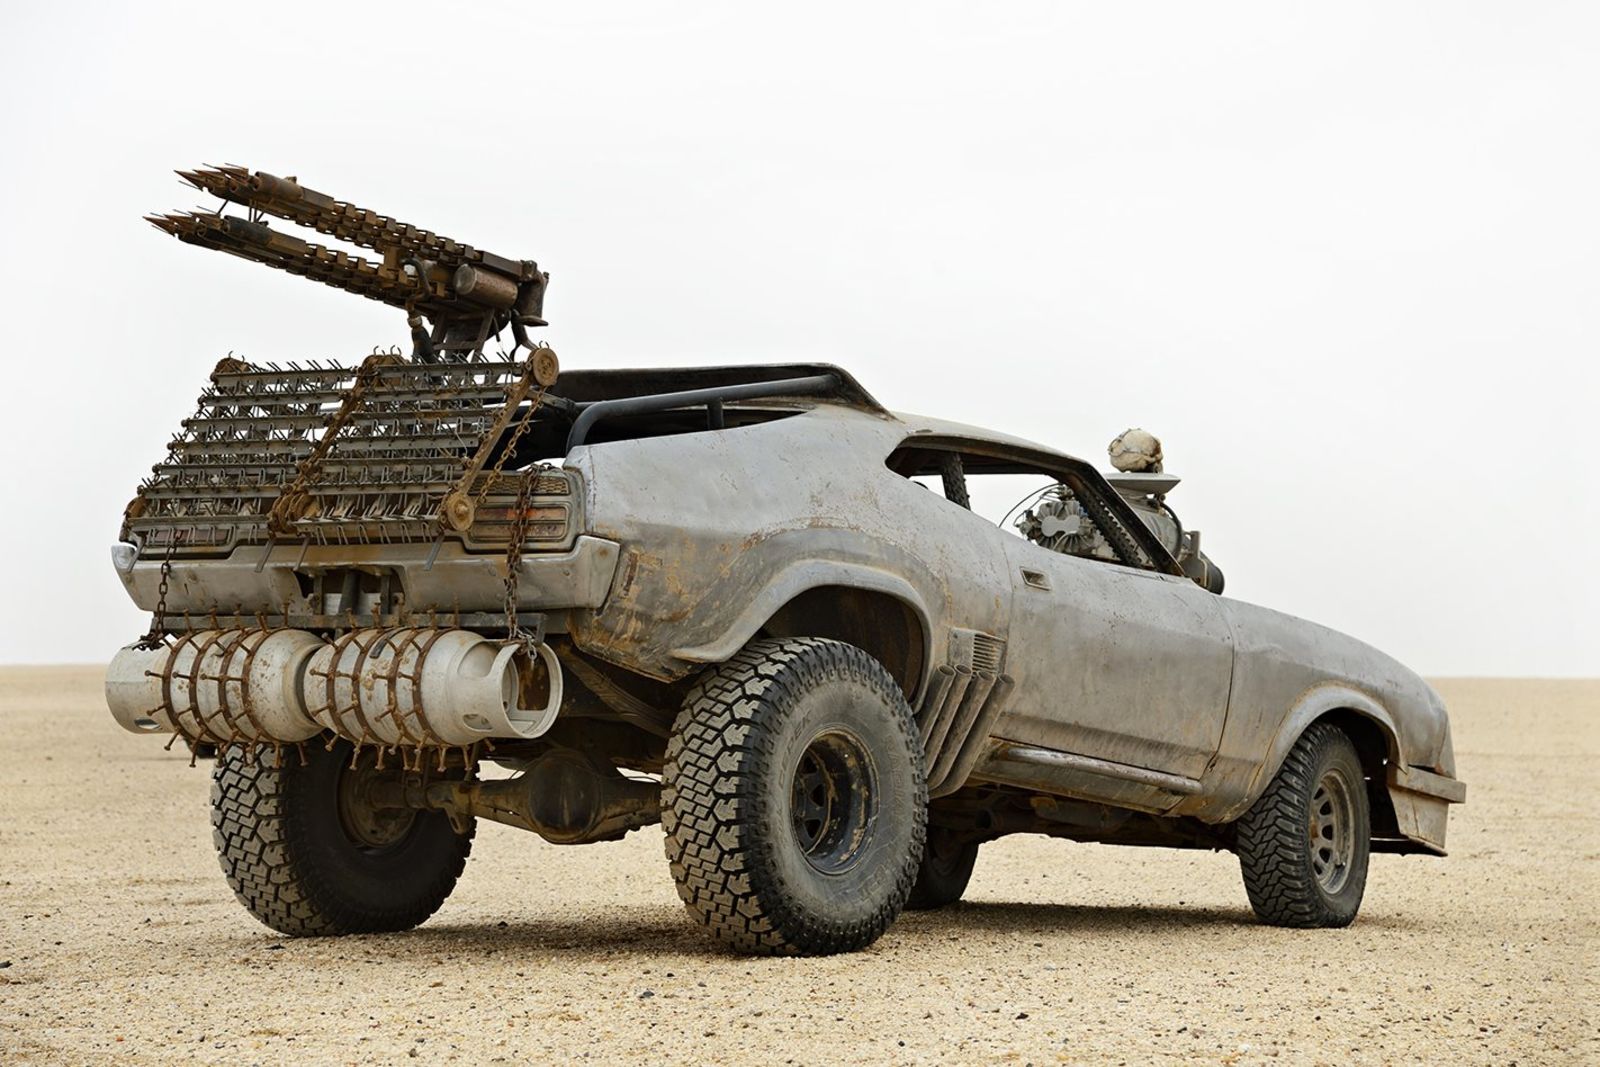 Illustration for article titled What are your best ideas for post-apocalyptic vehicles?